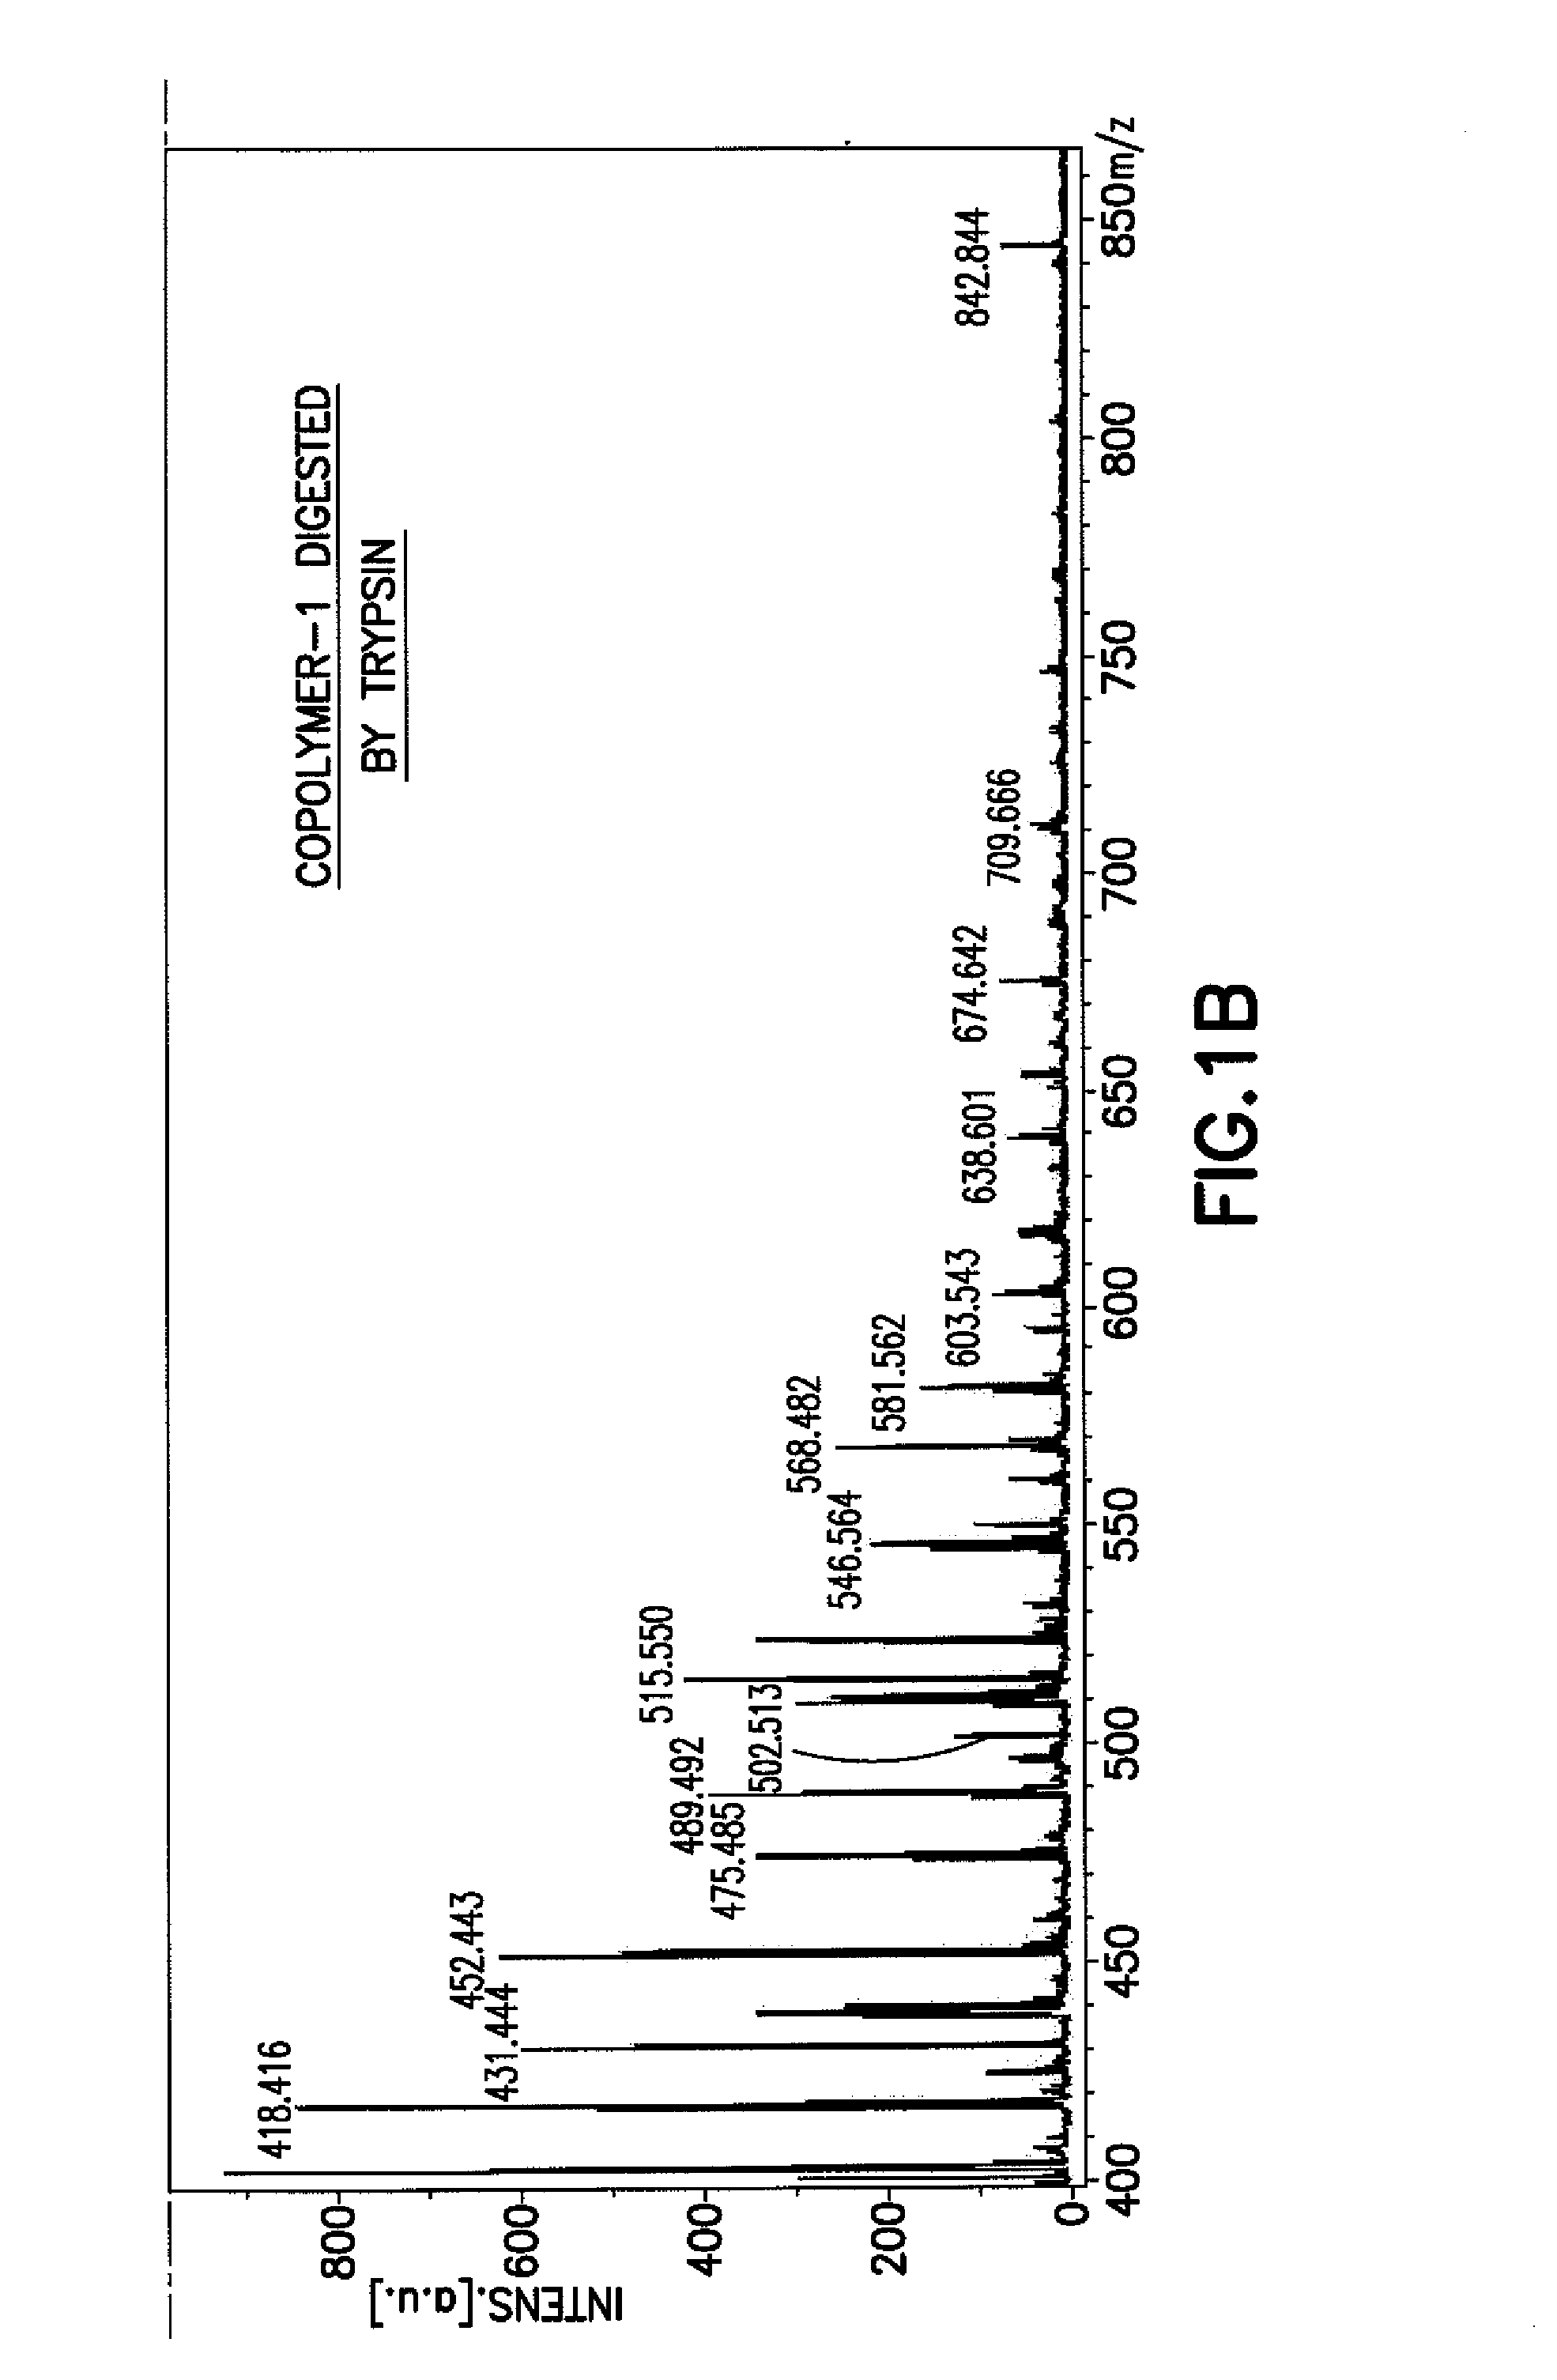 Methods for Chemical Equivalence in characterizing of complex molecules